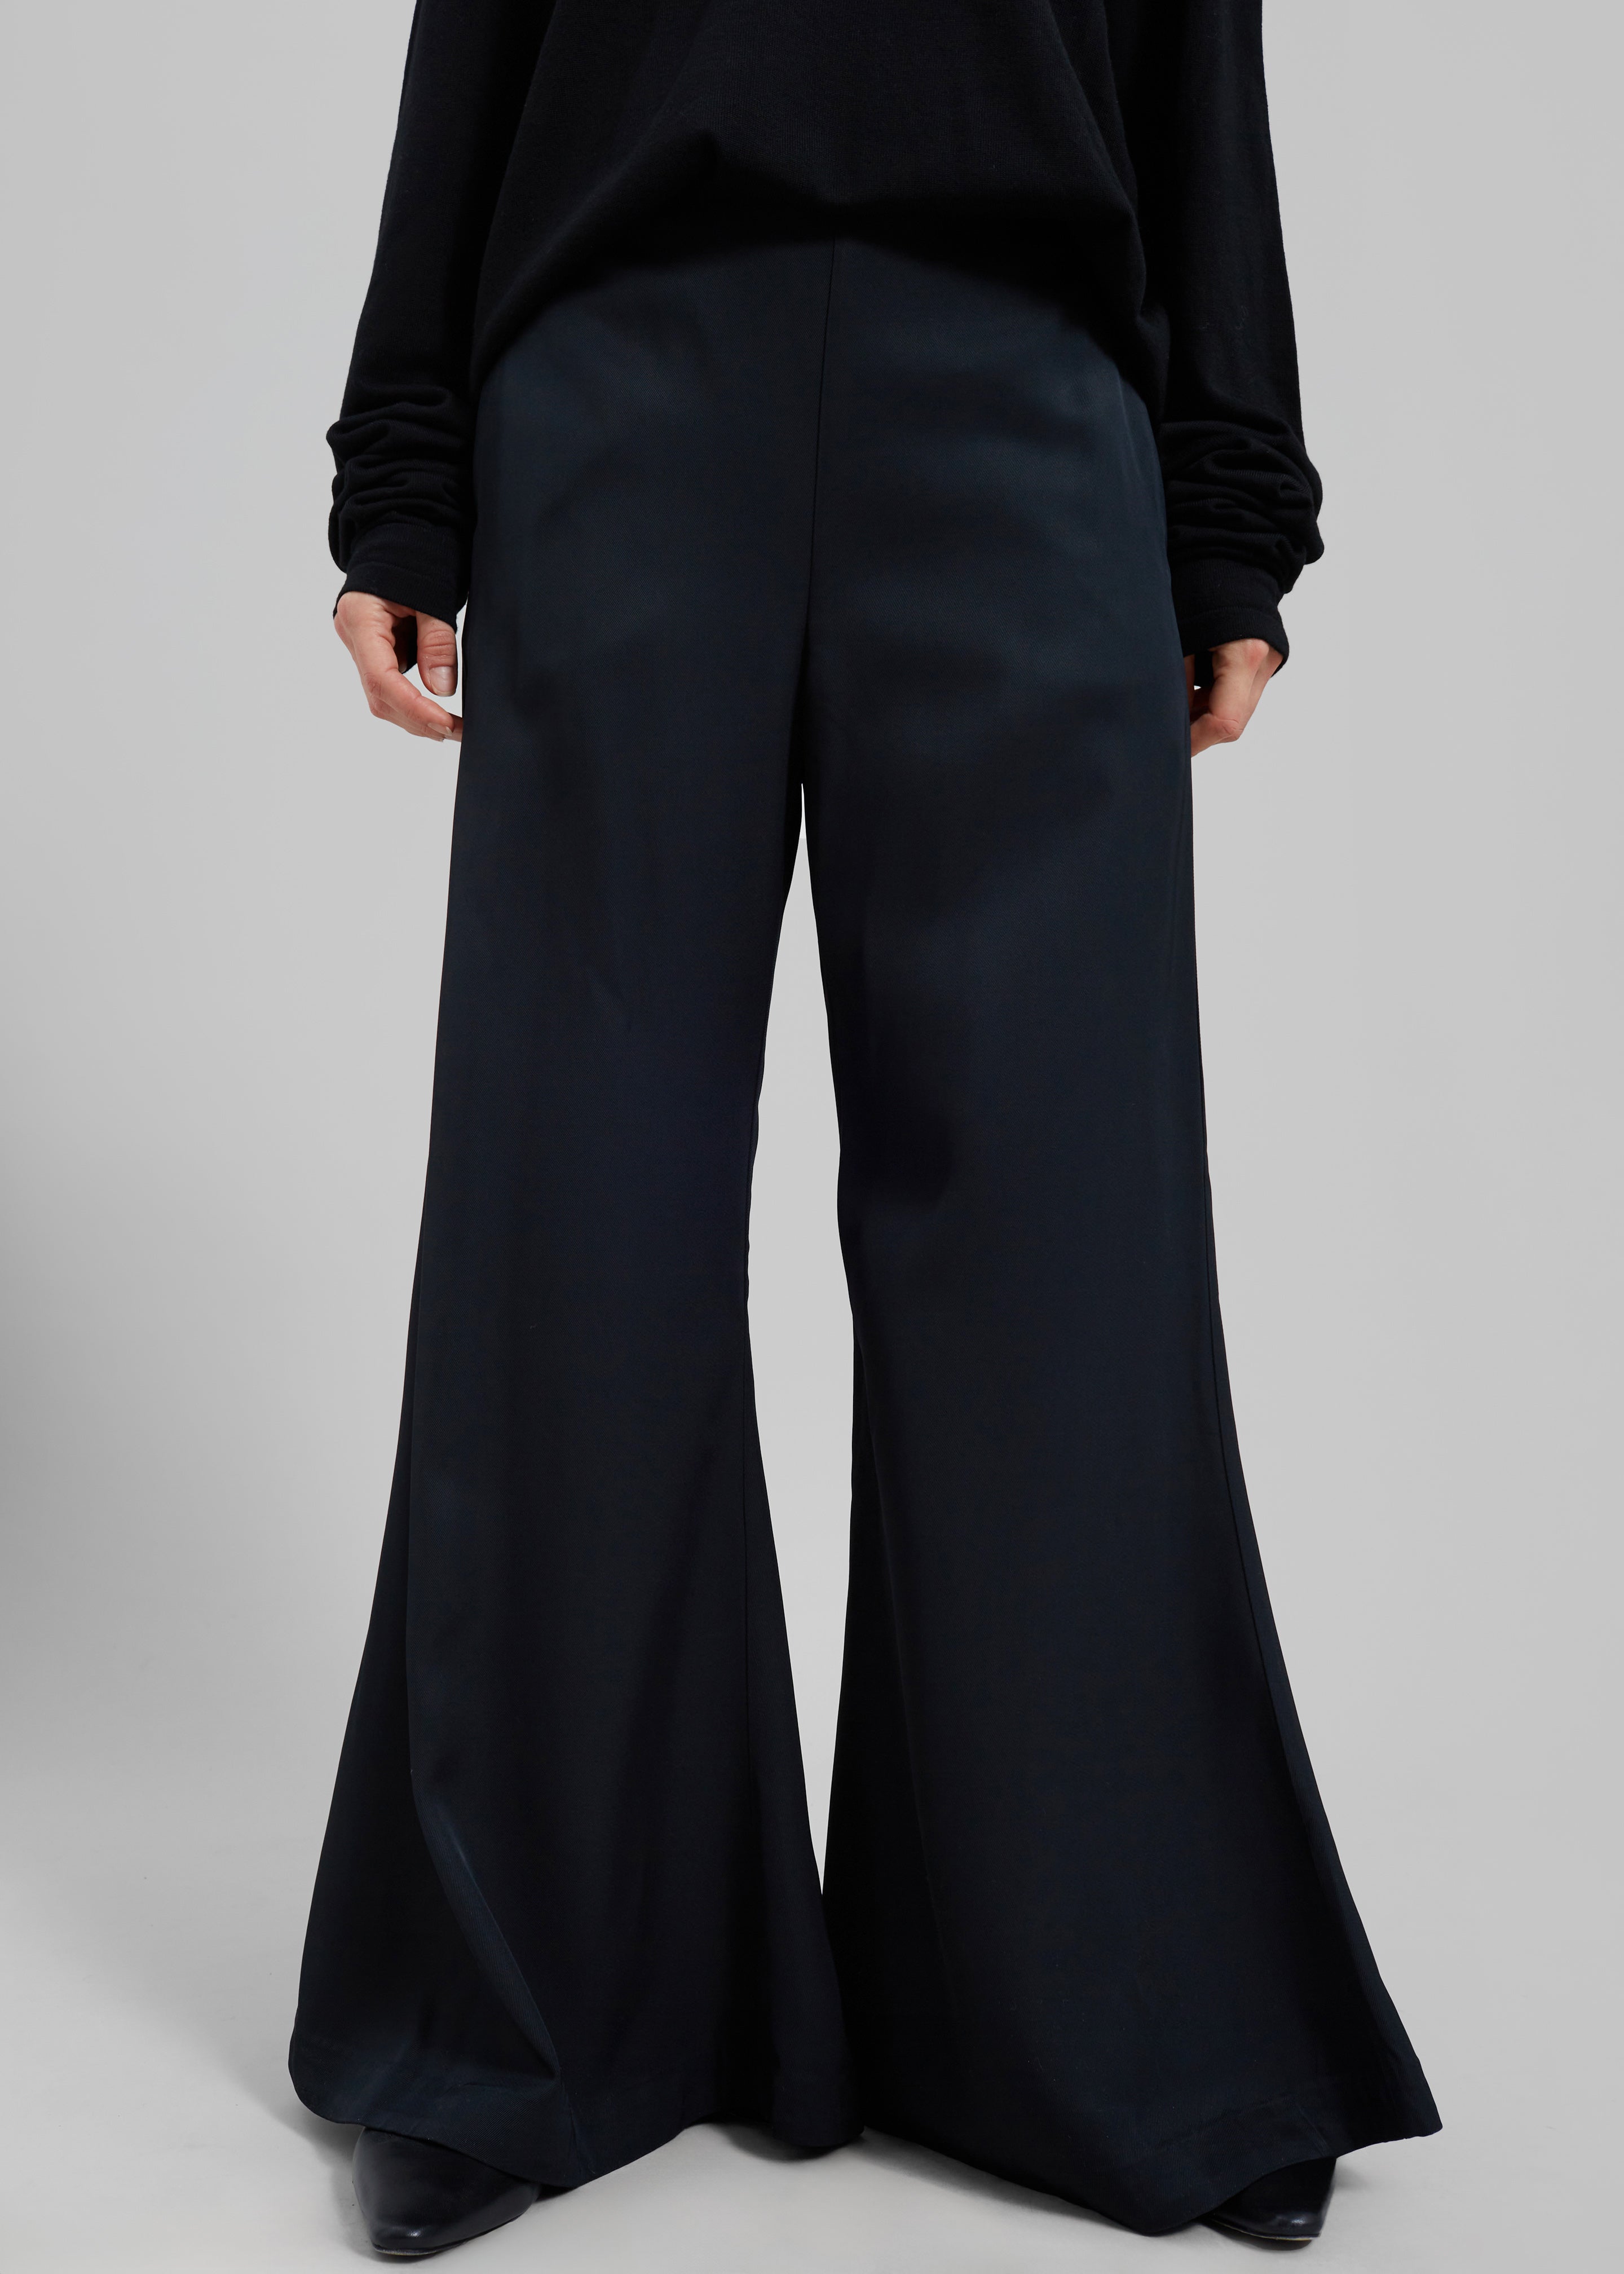 By Malene Birger Lucee Flared Trousers - Black - 4